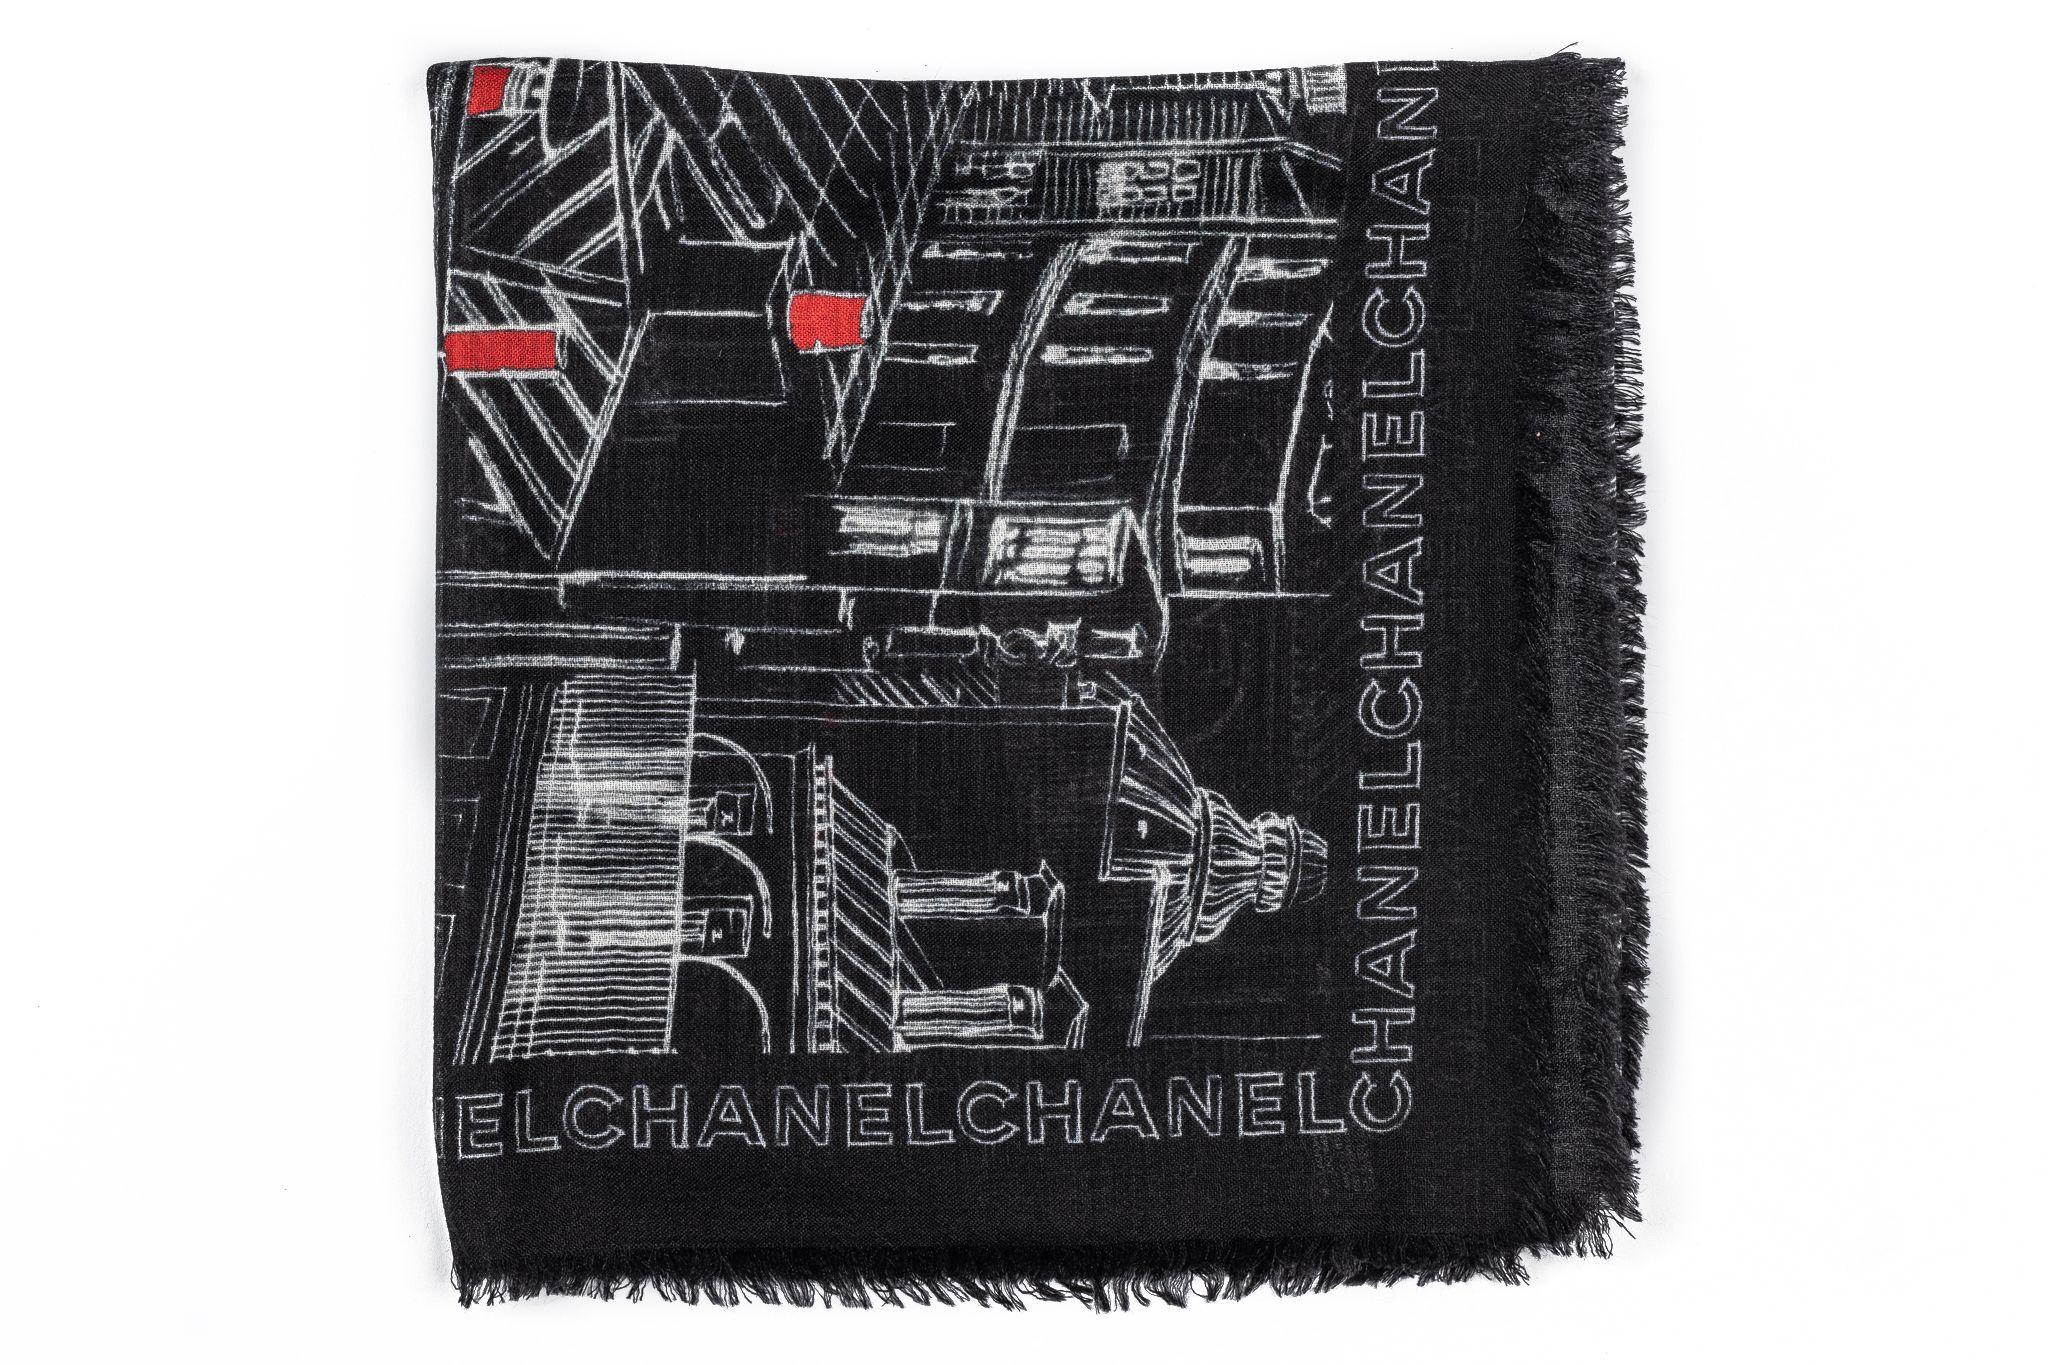 Chanel Cashmere Shawl in black featuring a print of Paris and framed with Chanel writings. In new condition.